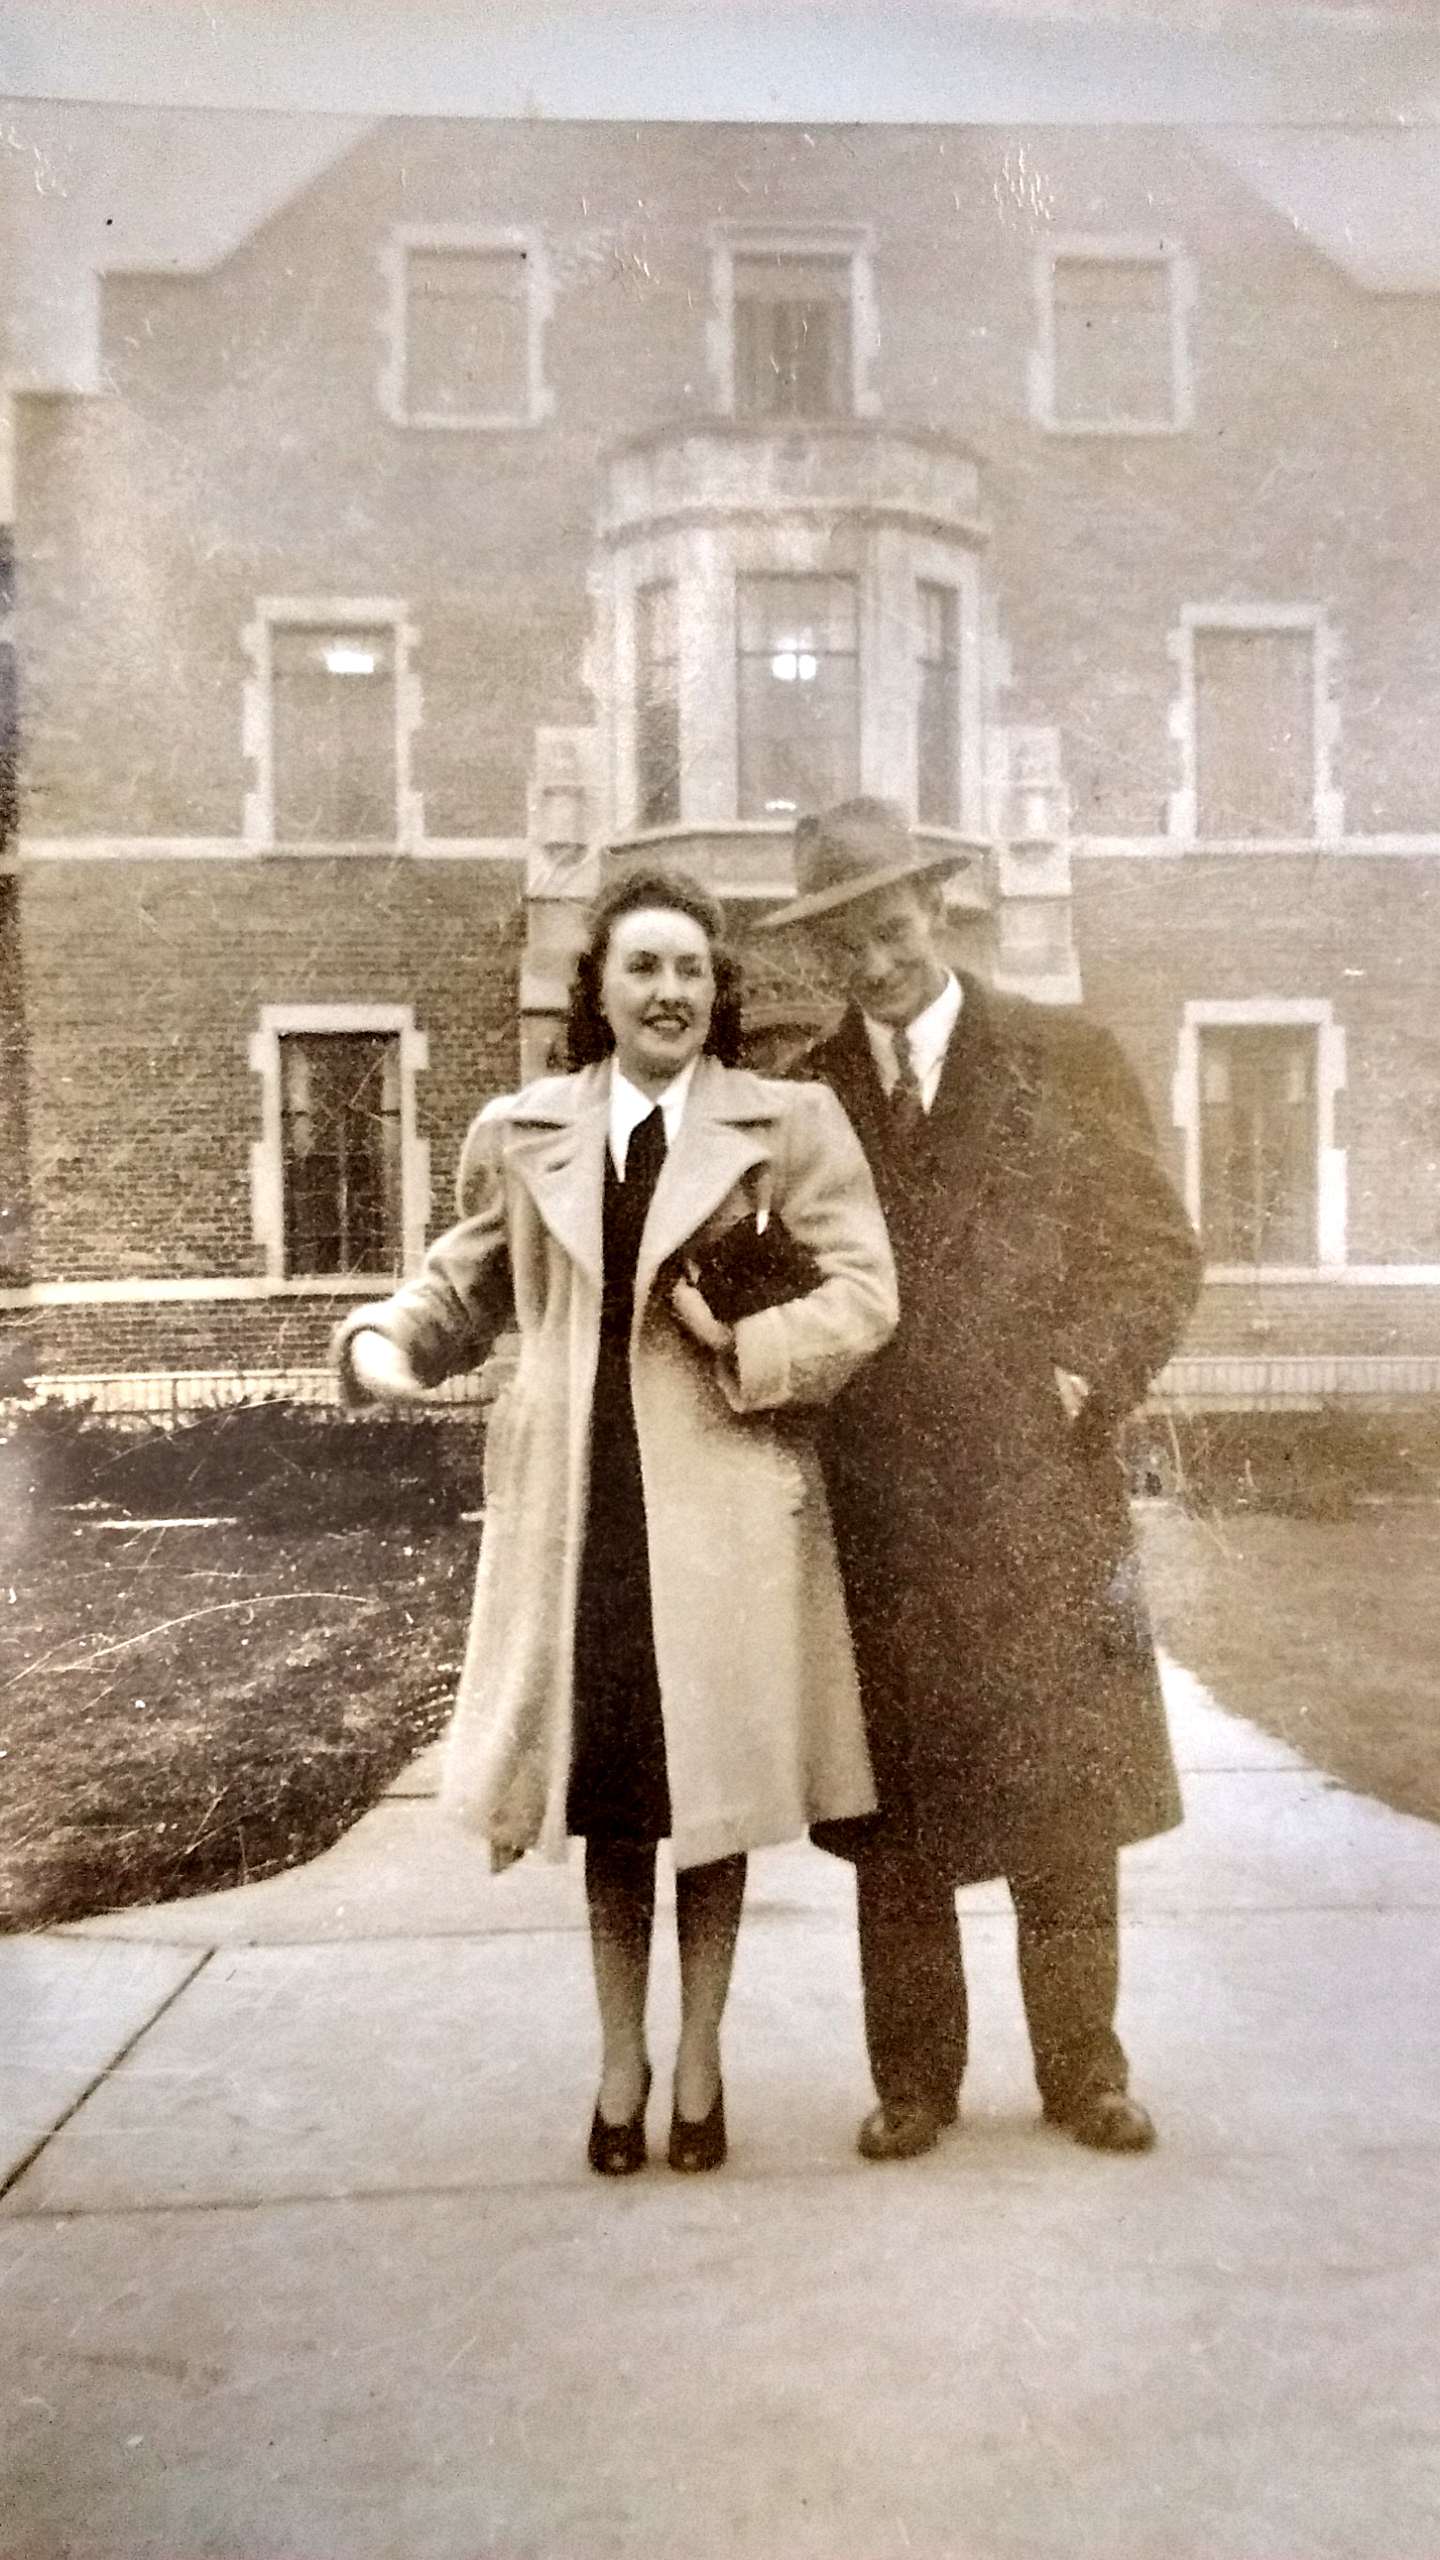 Harold Phillips and his fiancée Betty